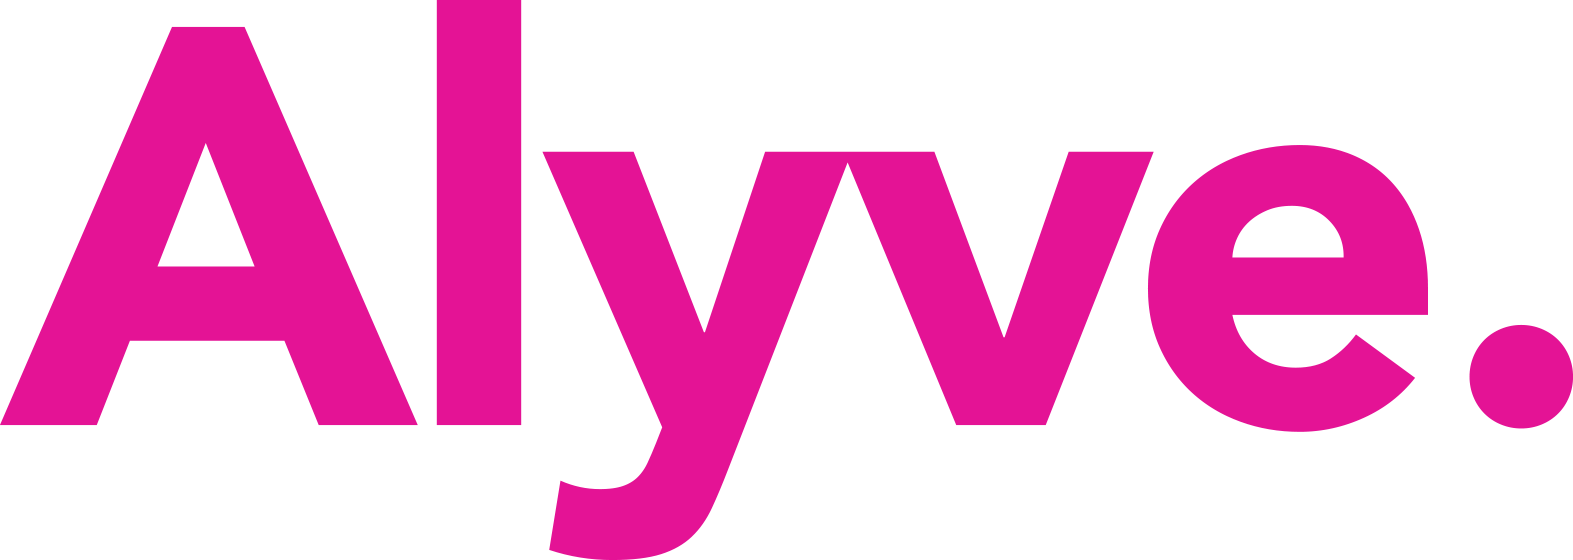 Alyve logo in bright pink text. 